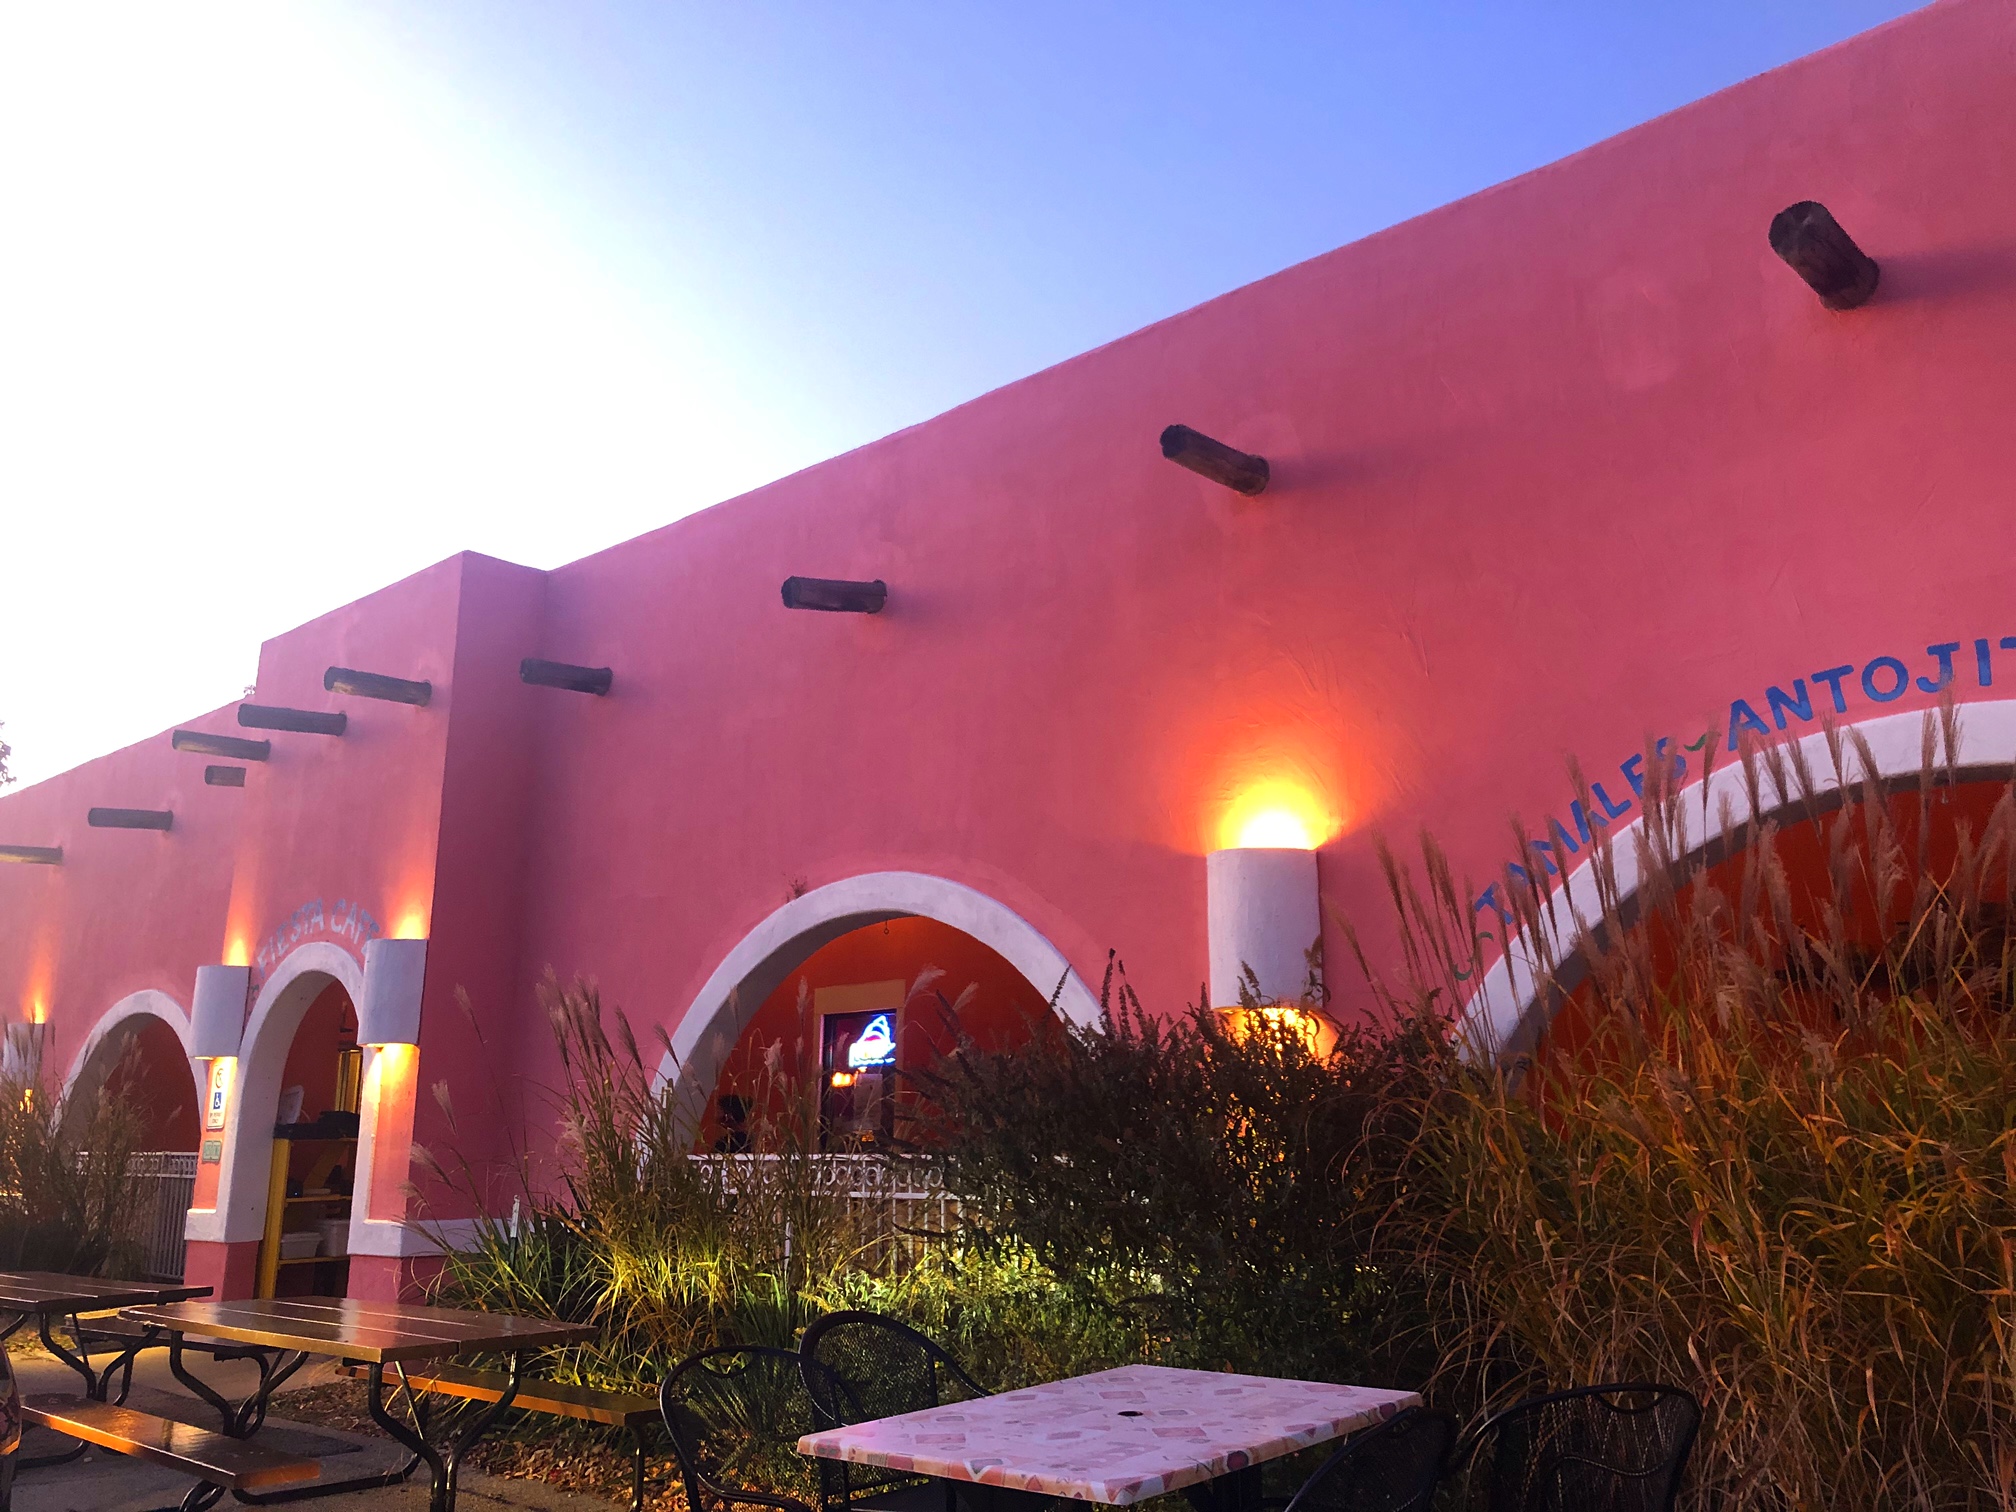 An outdoor photo of the exterior of Fiesta Cafe in Champaign, Illinois. The pink building has arched entryways and arched windows into the outdoor, covered patio. Photo by Alyssa Buckley.